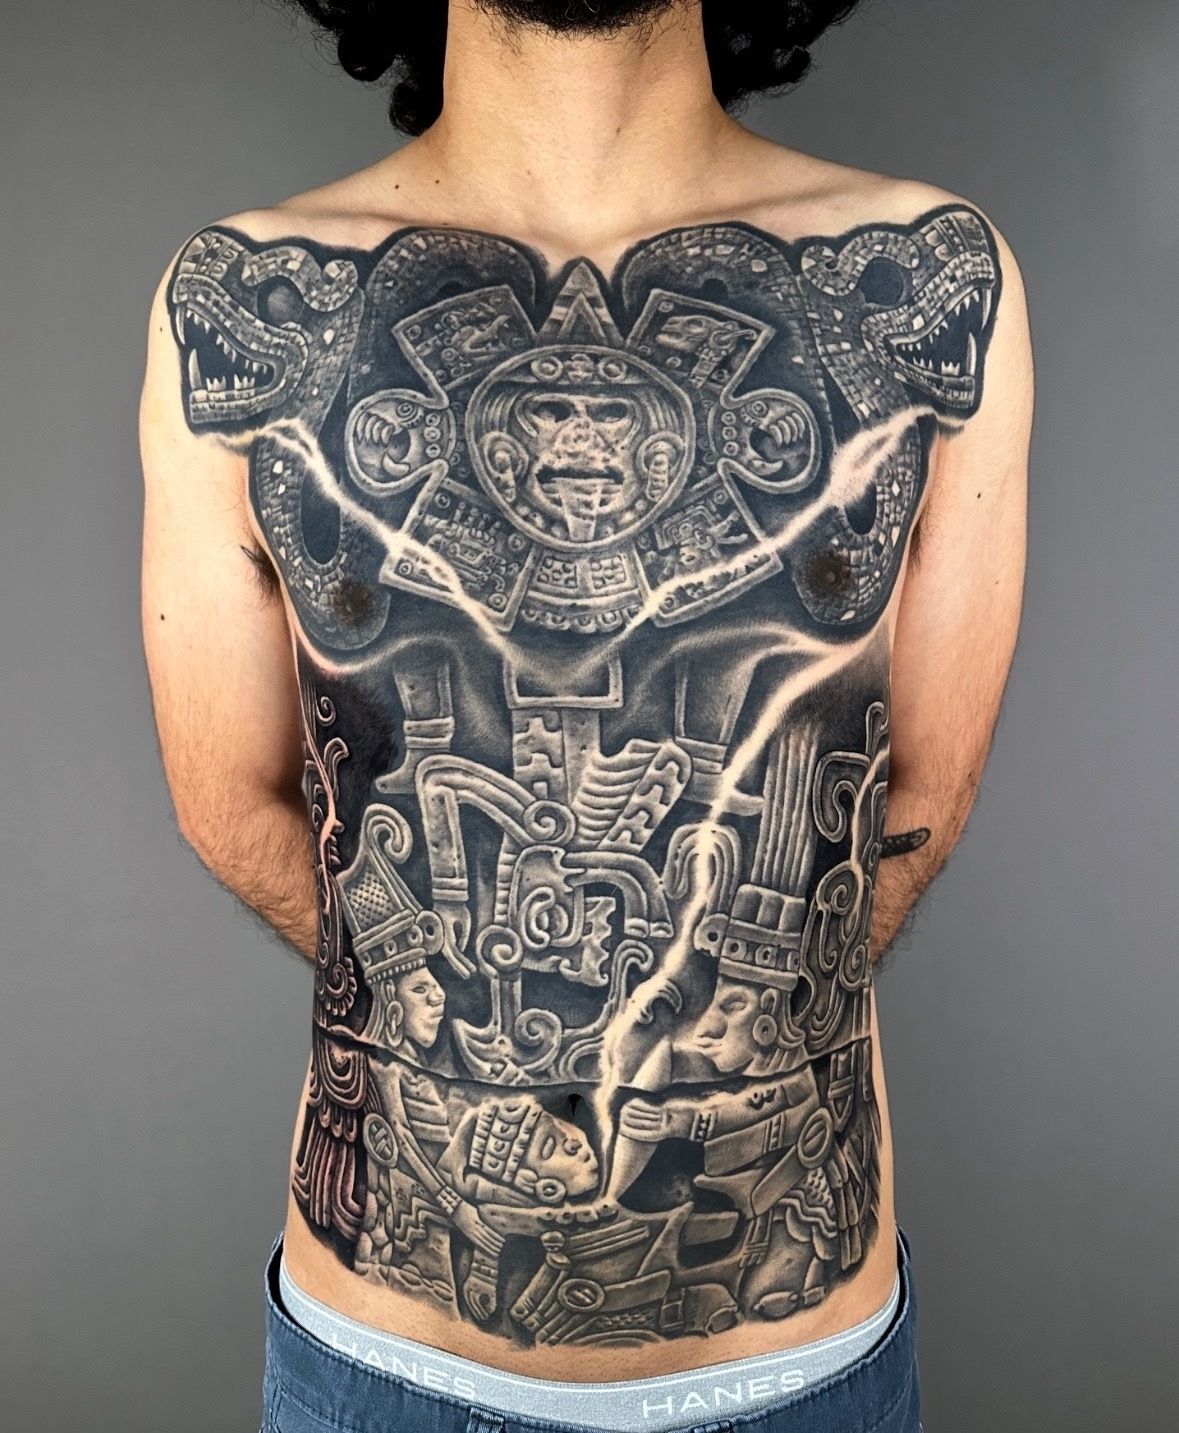 15 Aztec Tattoo Designs That Are Culturally Significant